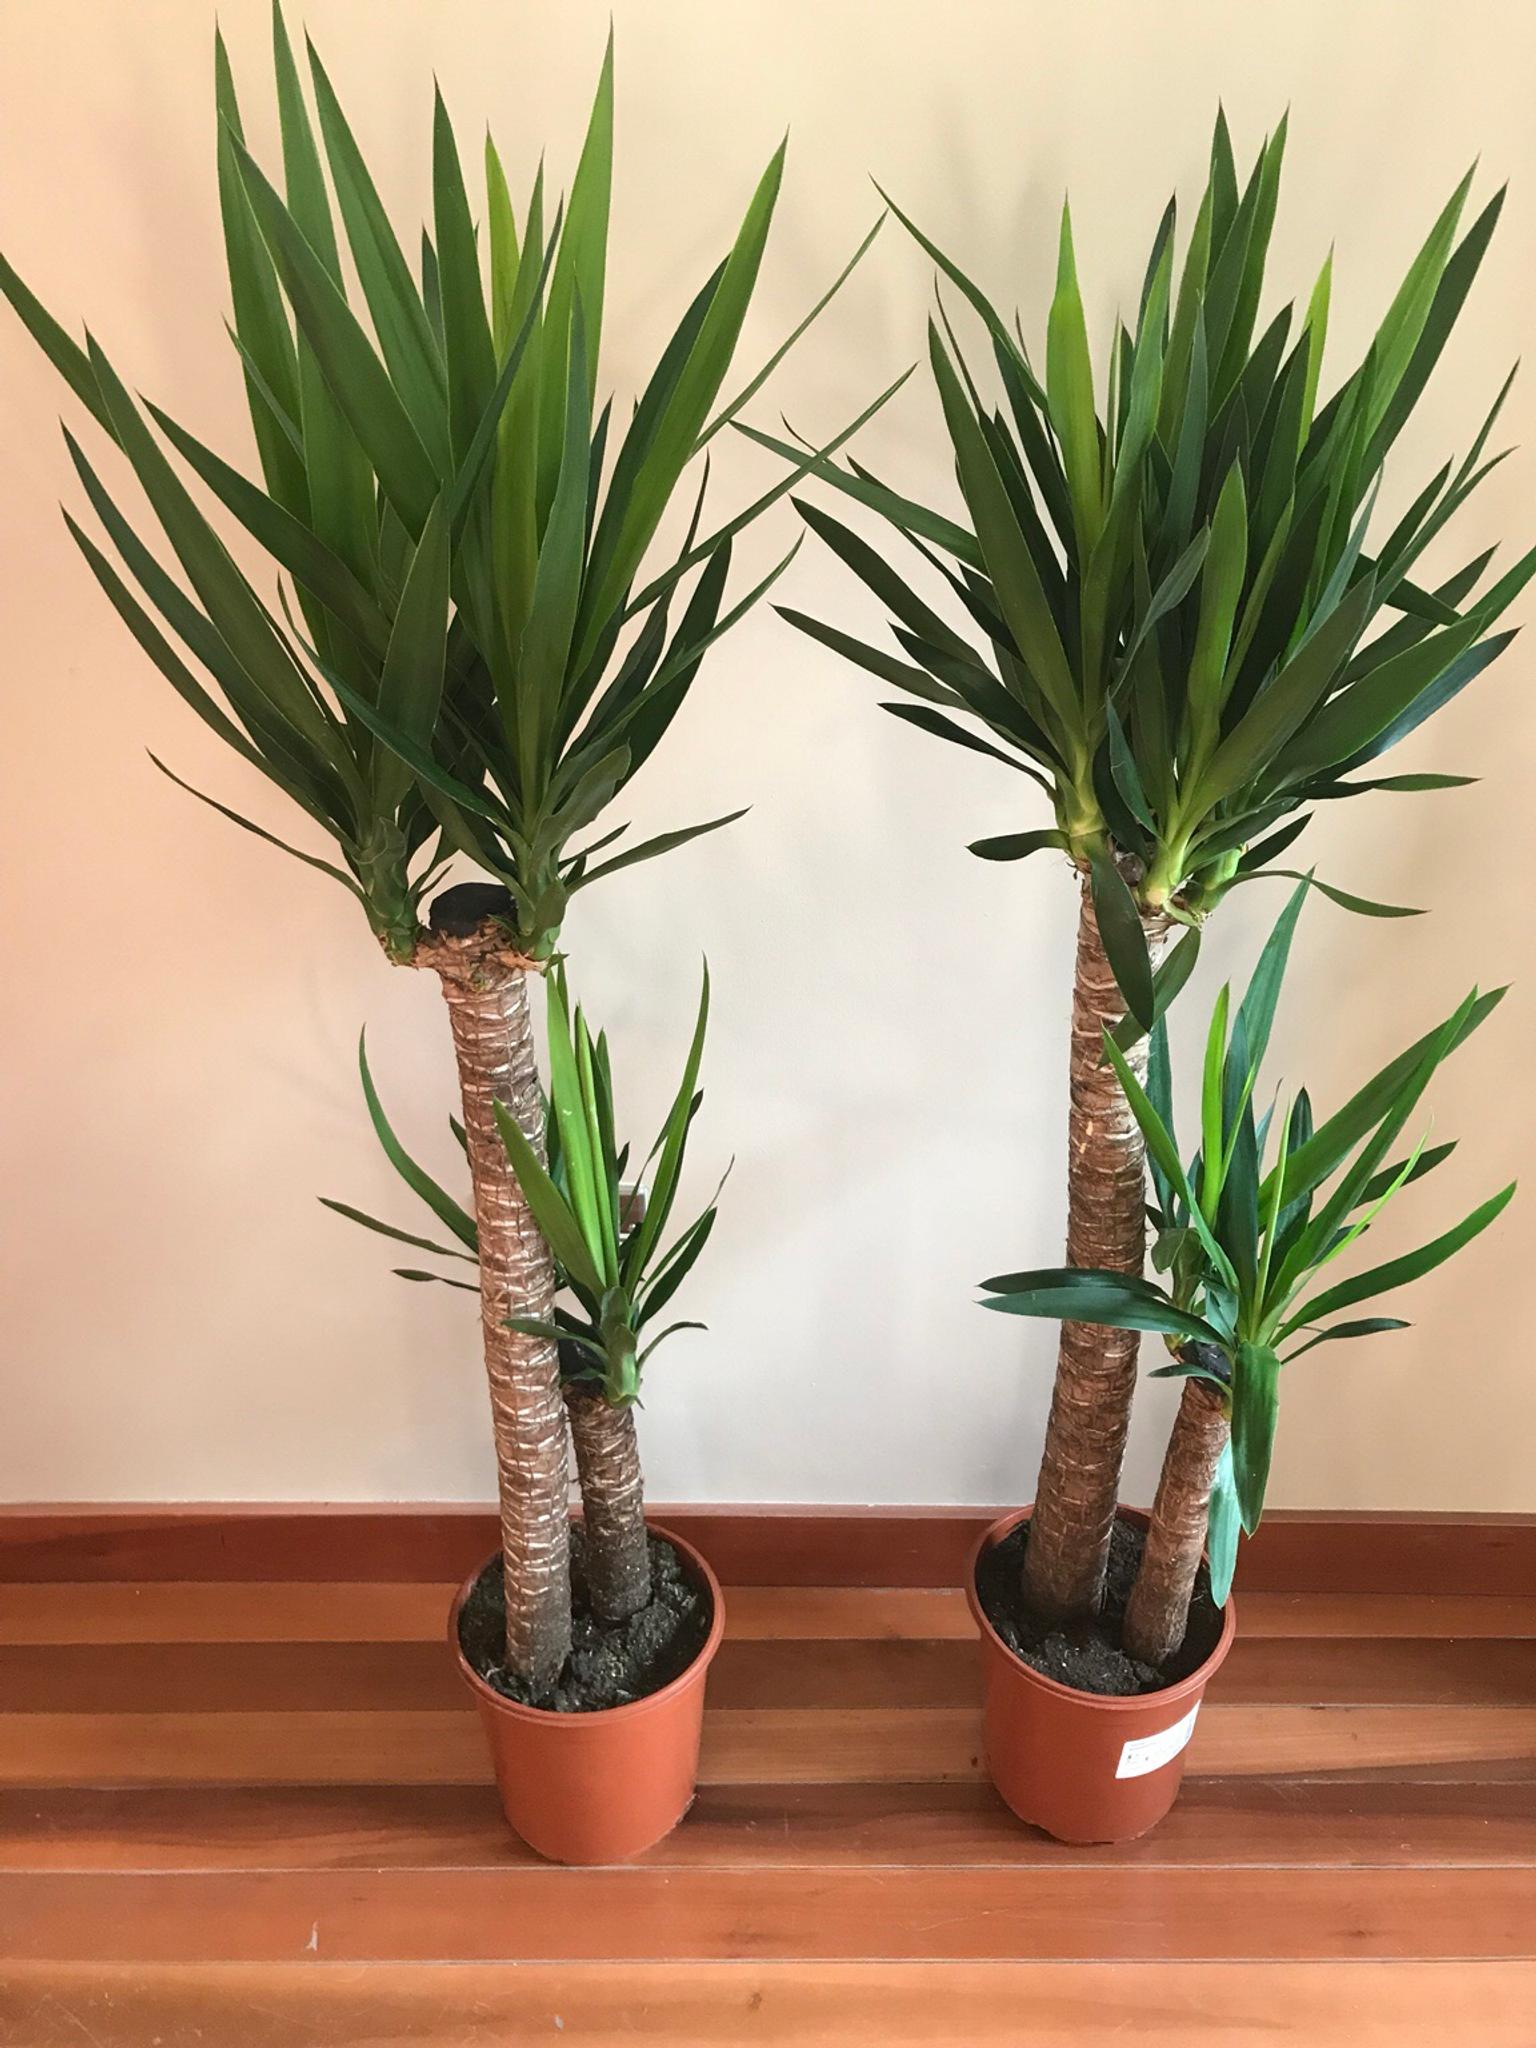 Two Ikea potted plants   YUCCA ELEPHANTIPES in L20 Liverpool für ...